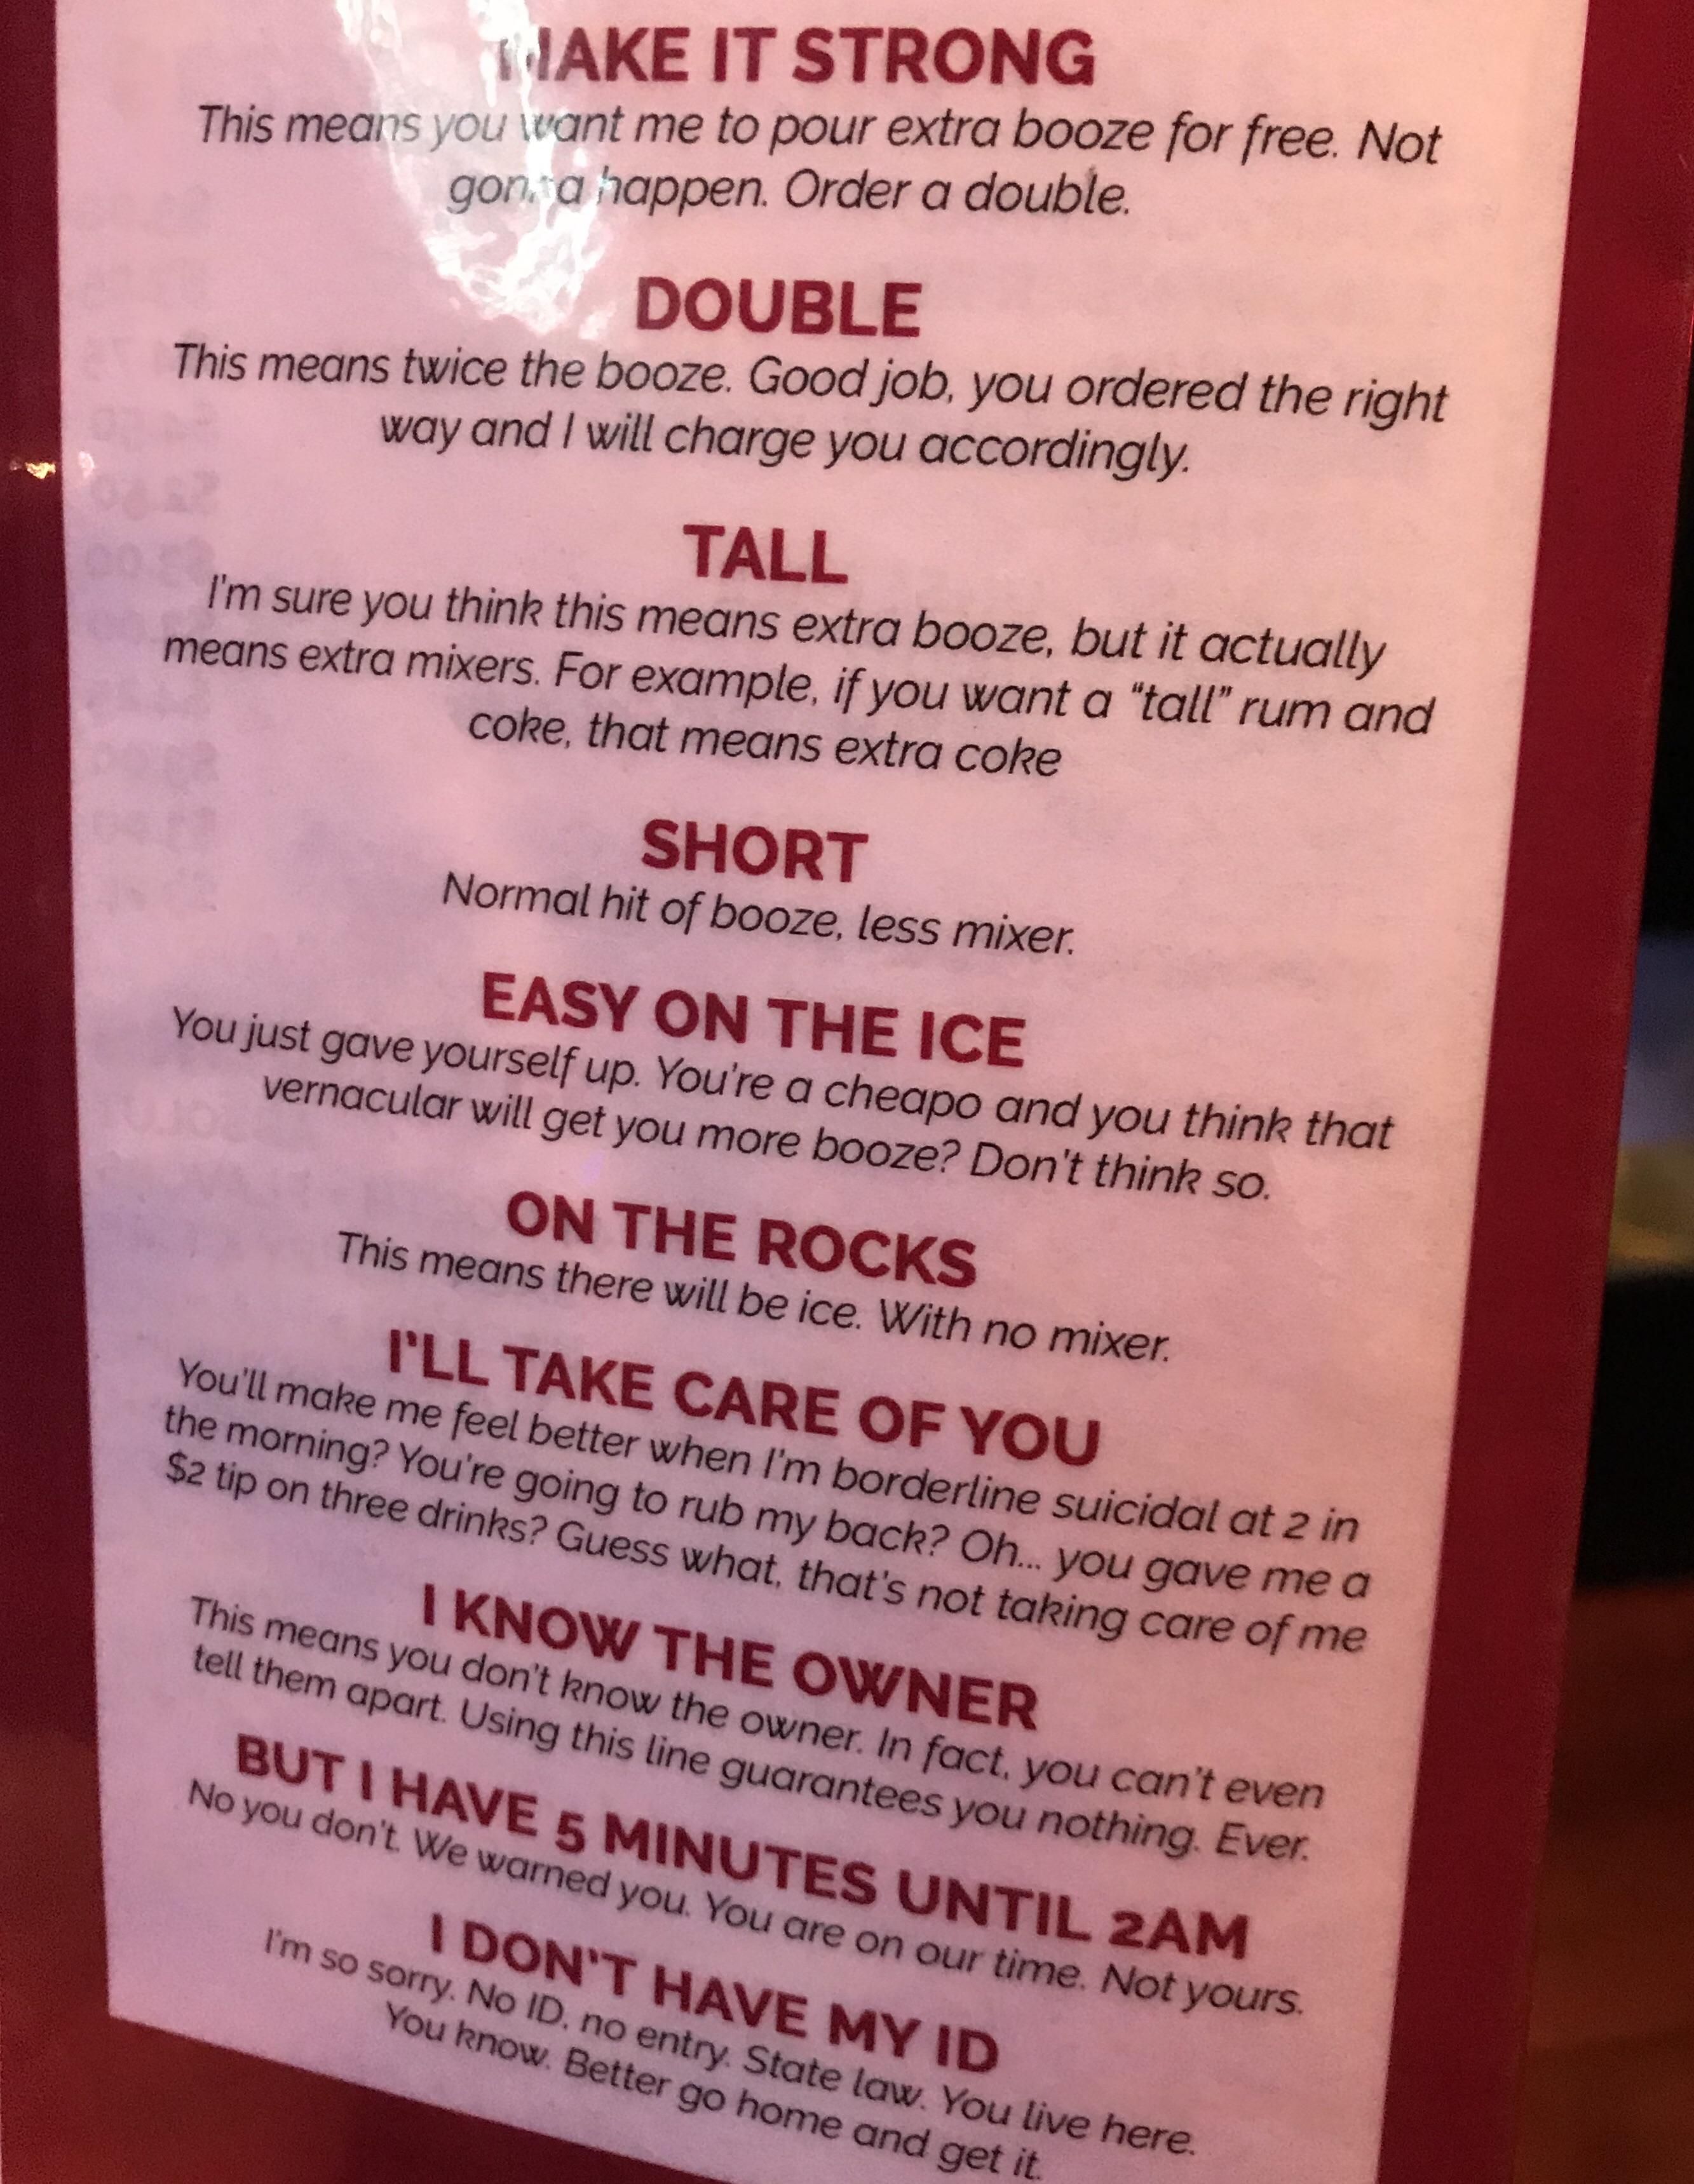 Just in case you think the bartender hasn’t heard that line before